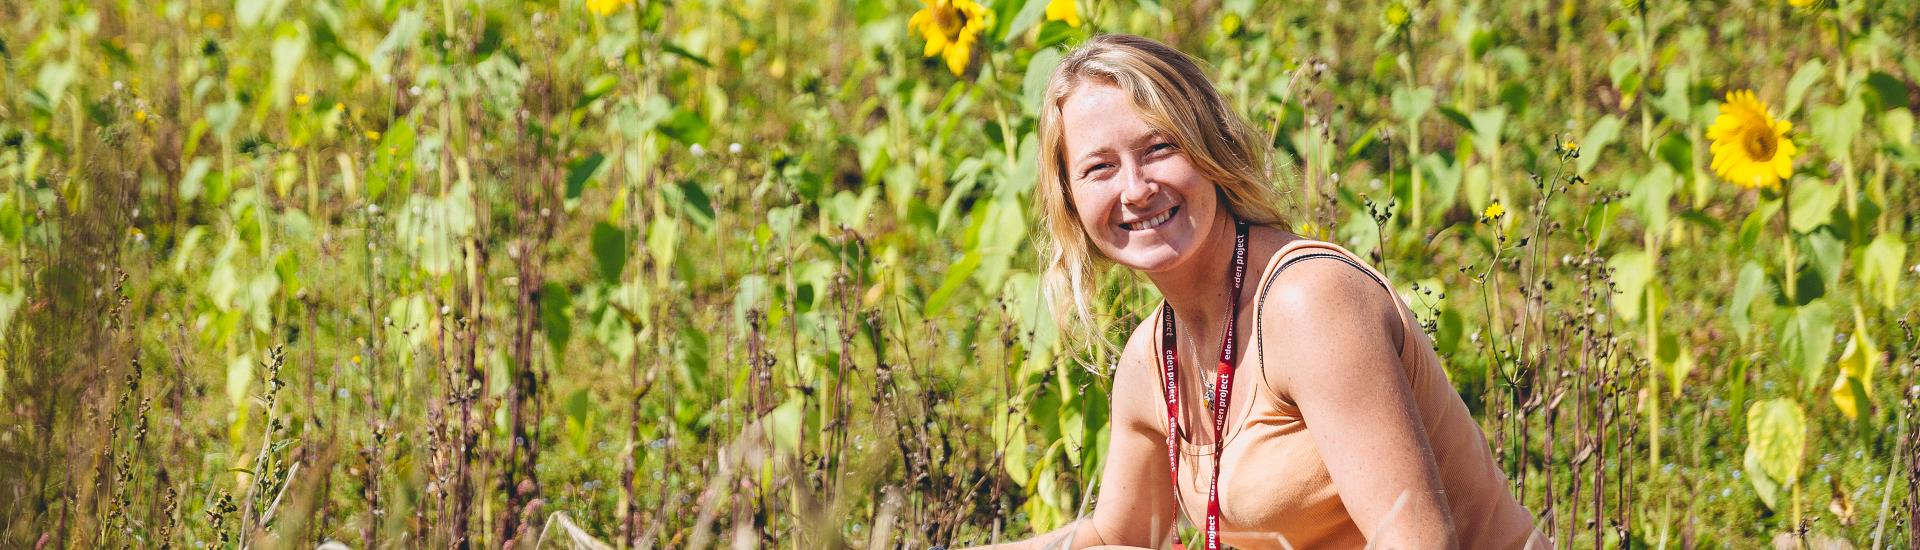 A Eden employee gardening looking to the camera surrounded by sunflowers